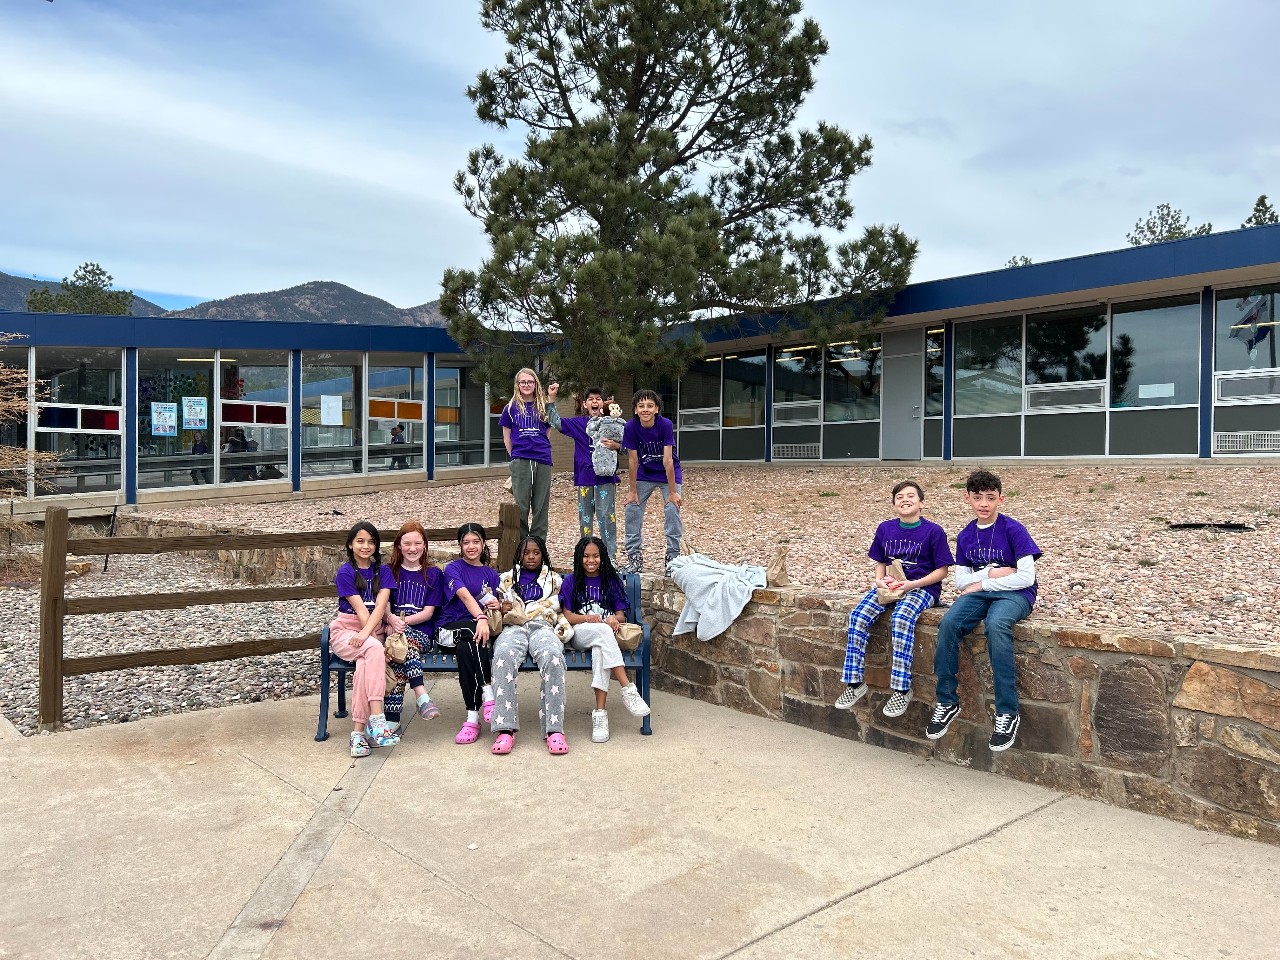 DVES students pose in the school's courtyard.